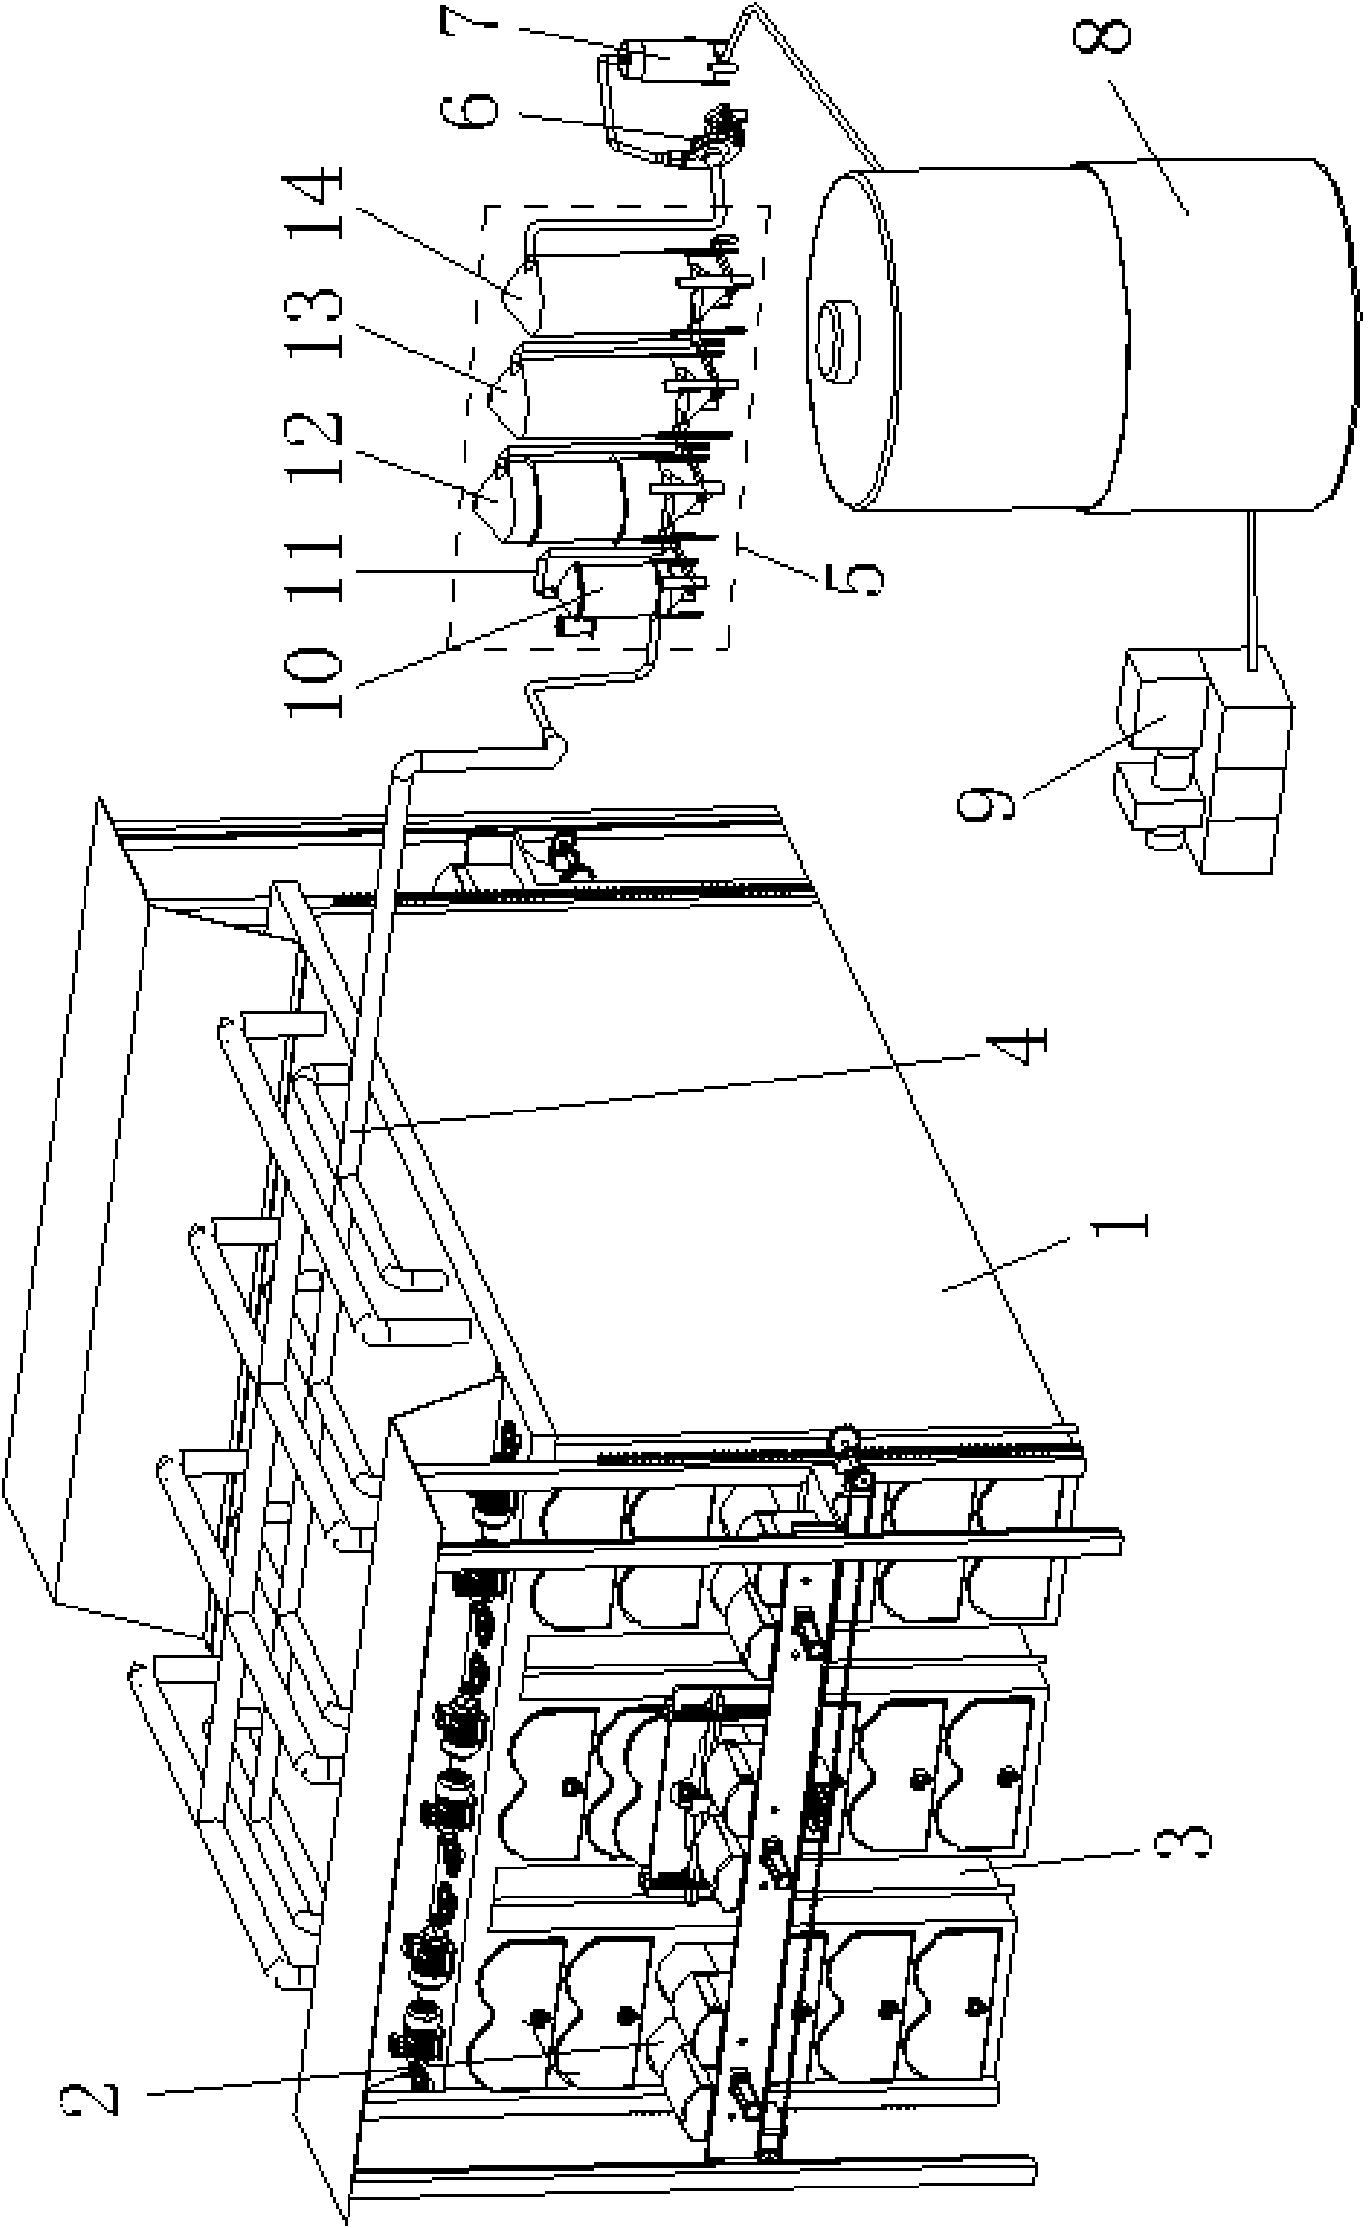 Method and device for generating power by utilizing waste gas of matrix-type charcoal kiln